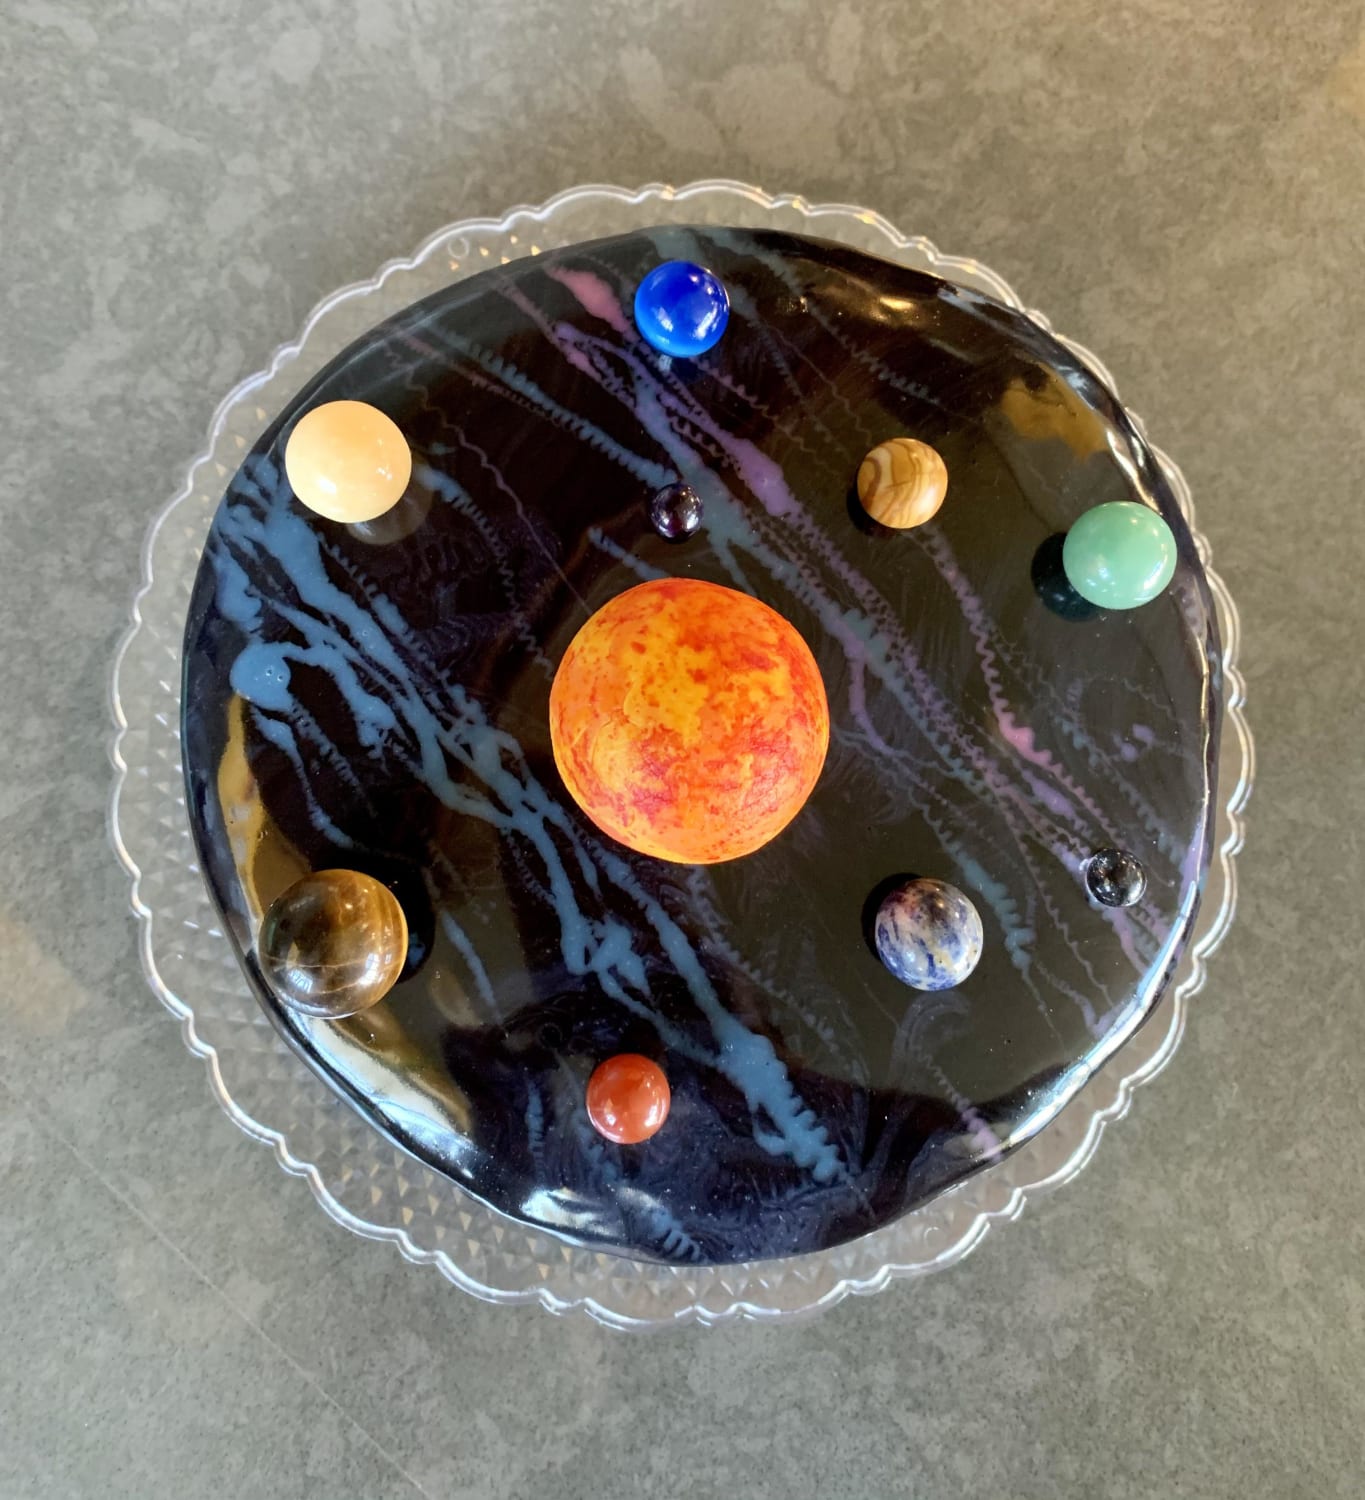 I’m usually terrible at decorating cakes, but I’m a little proud of my son’s solar system birthday cake.